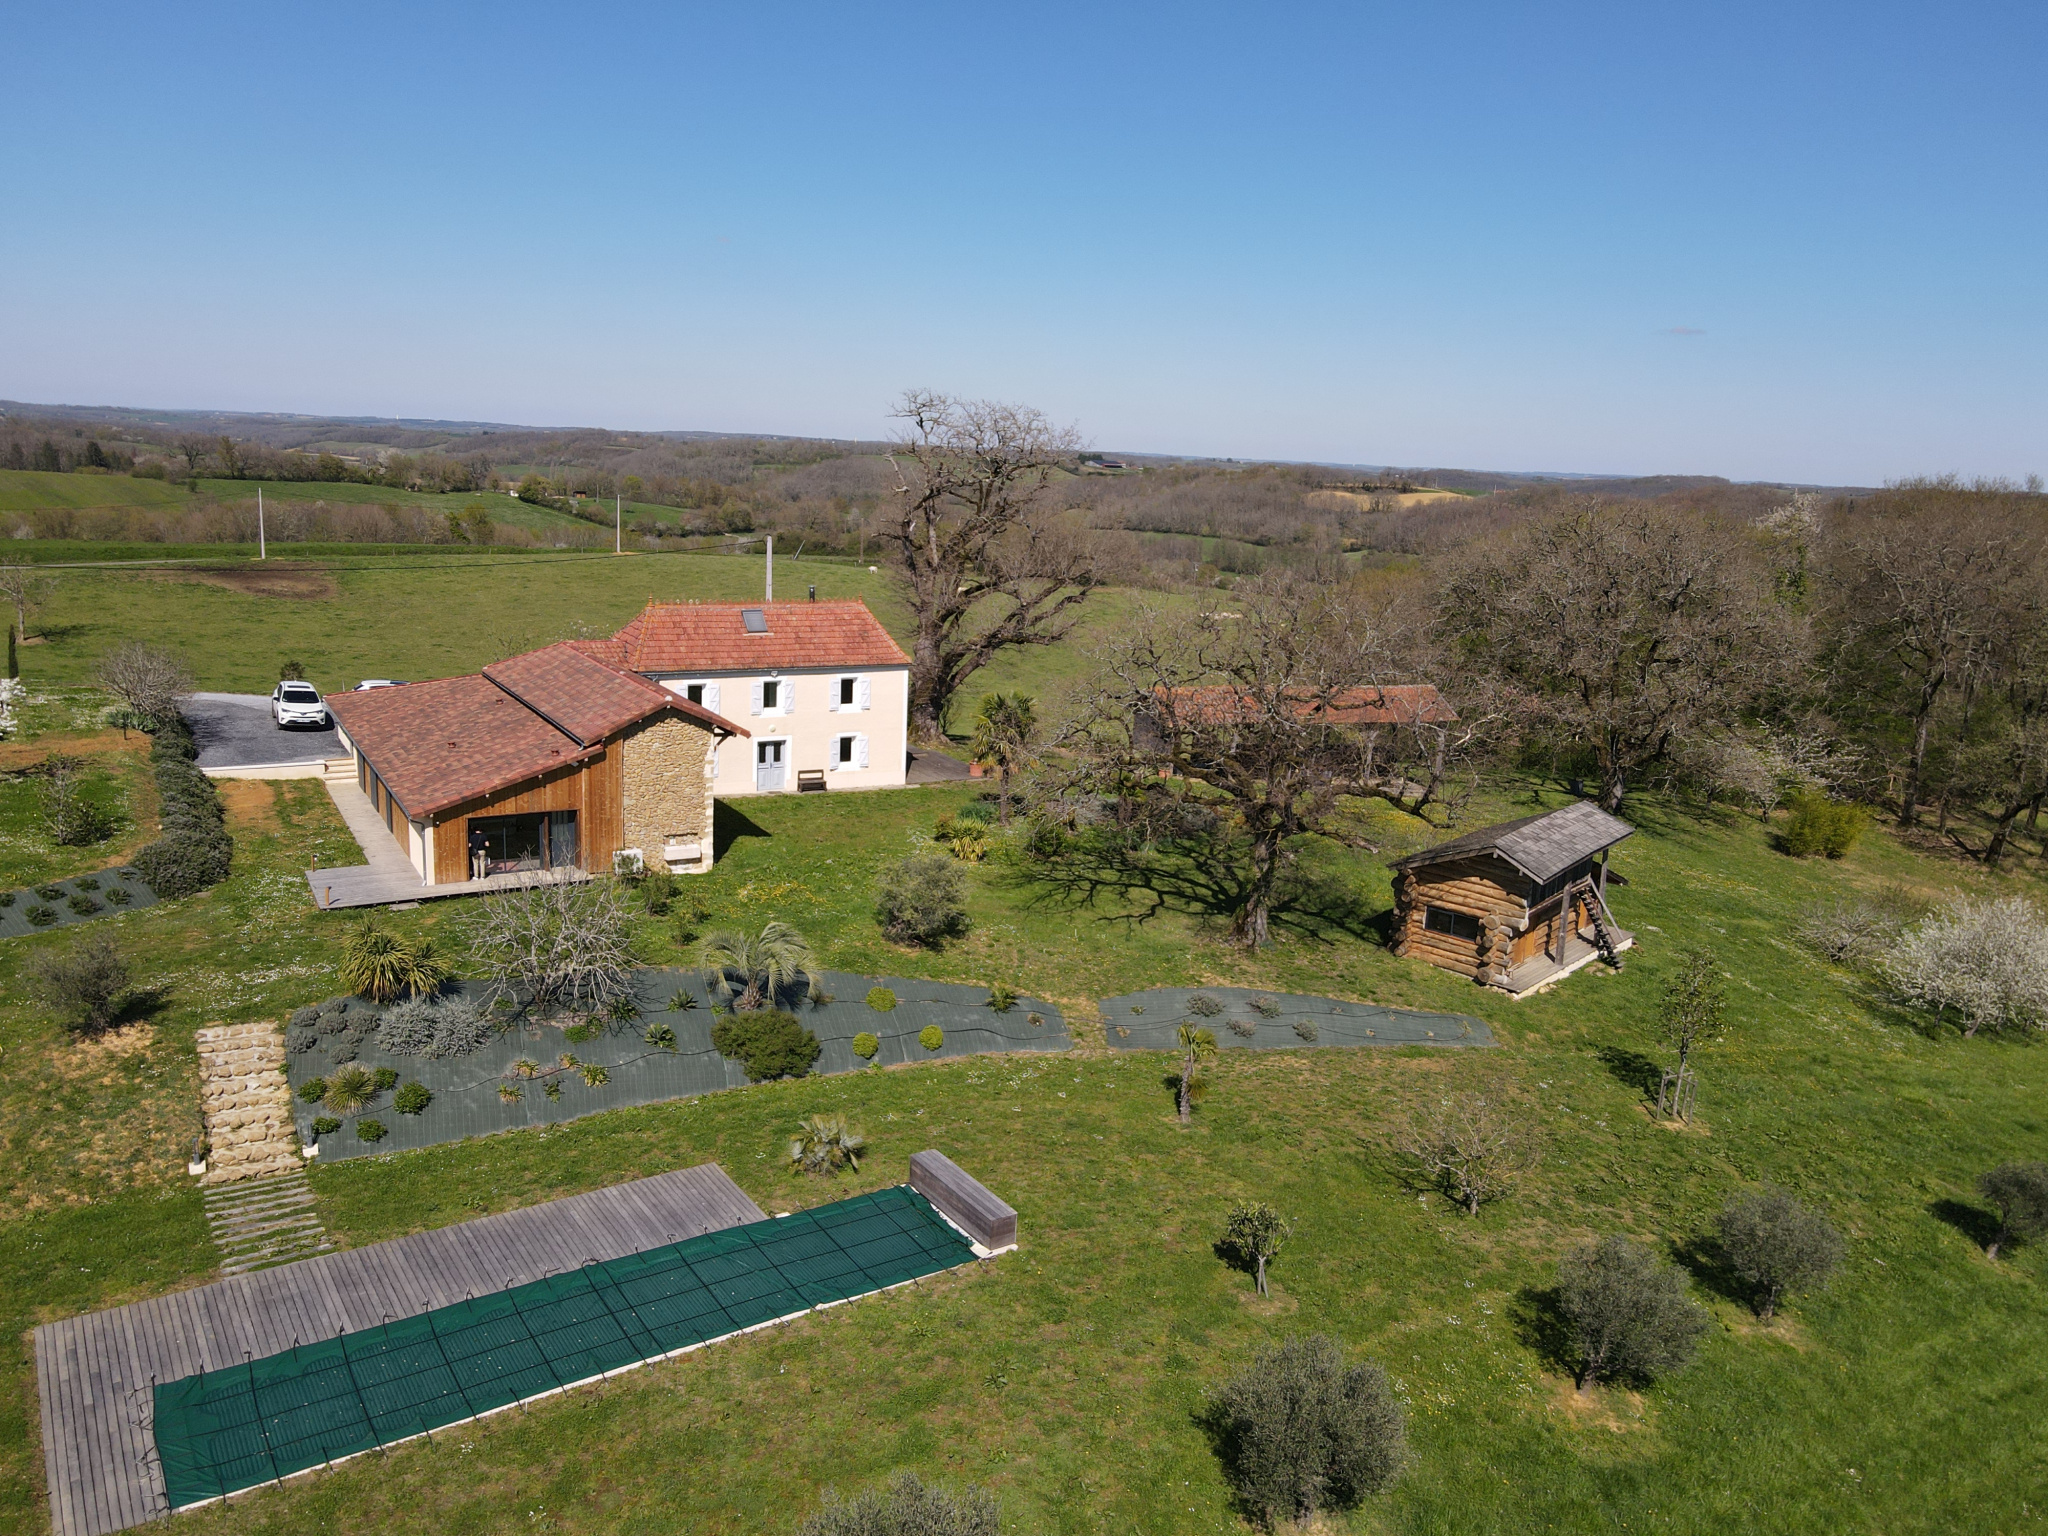 Maison de maître with recording studio gîte and swimming pool in Marciac